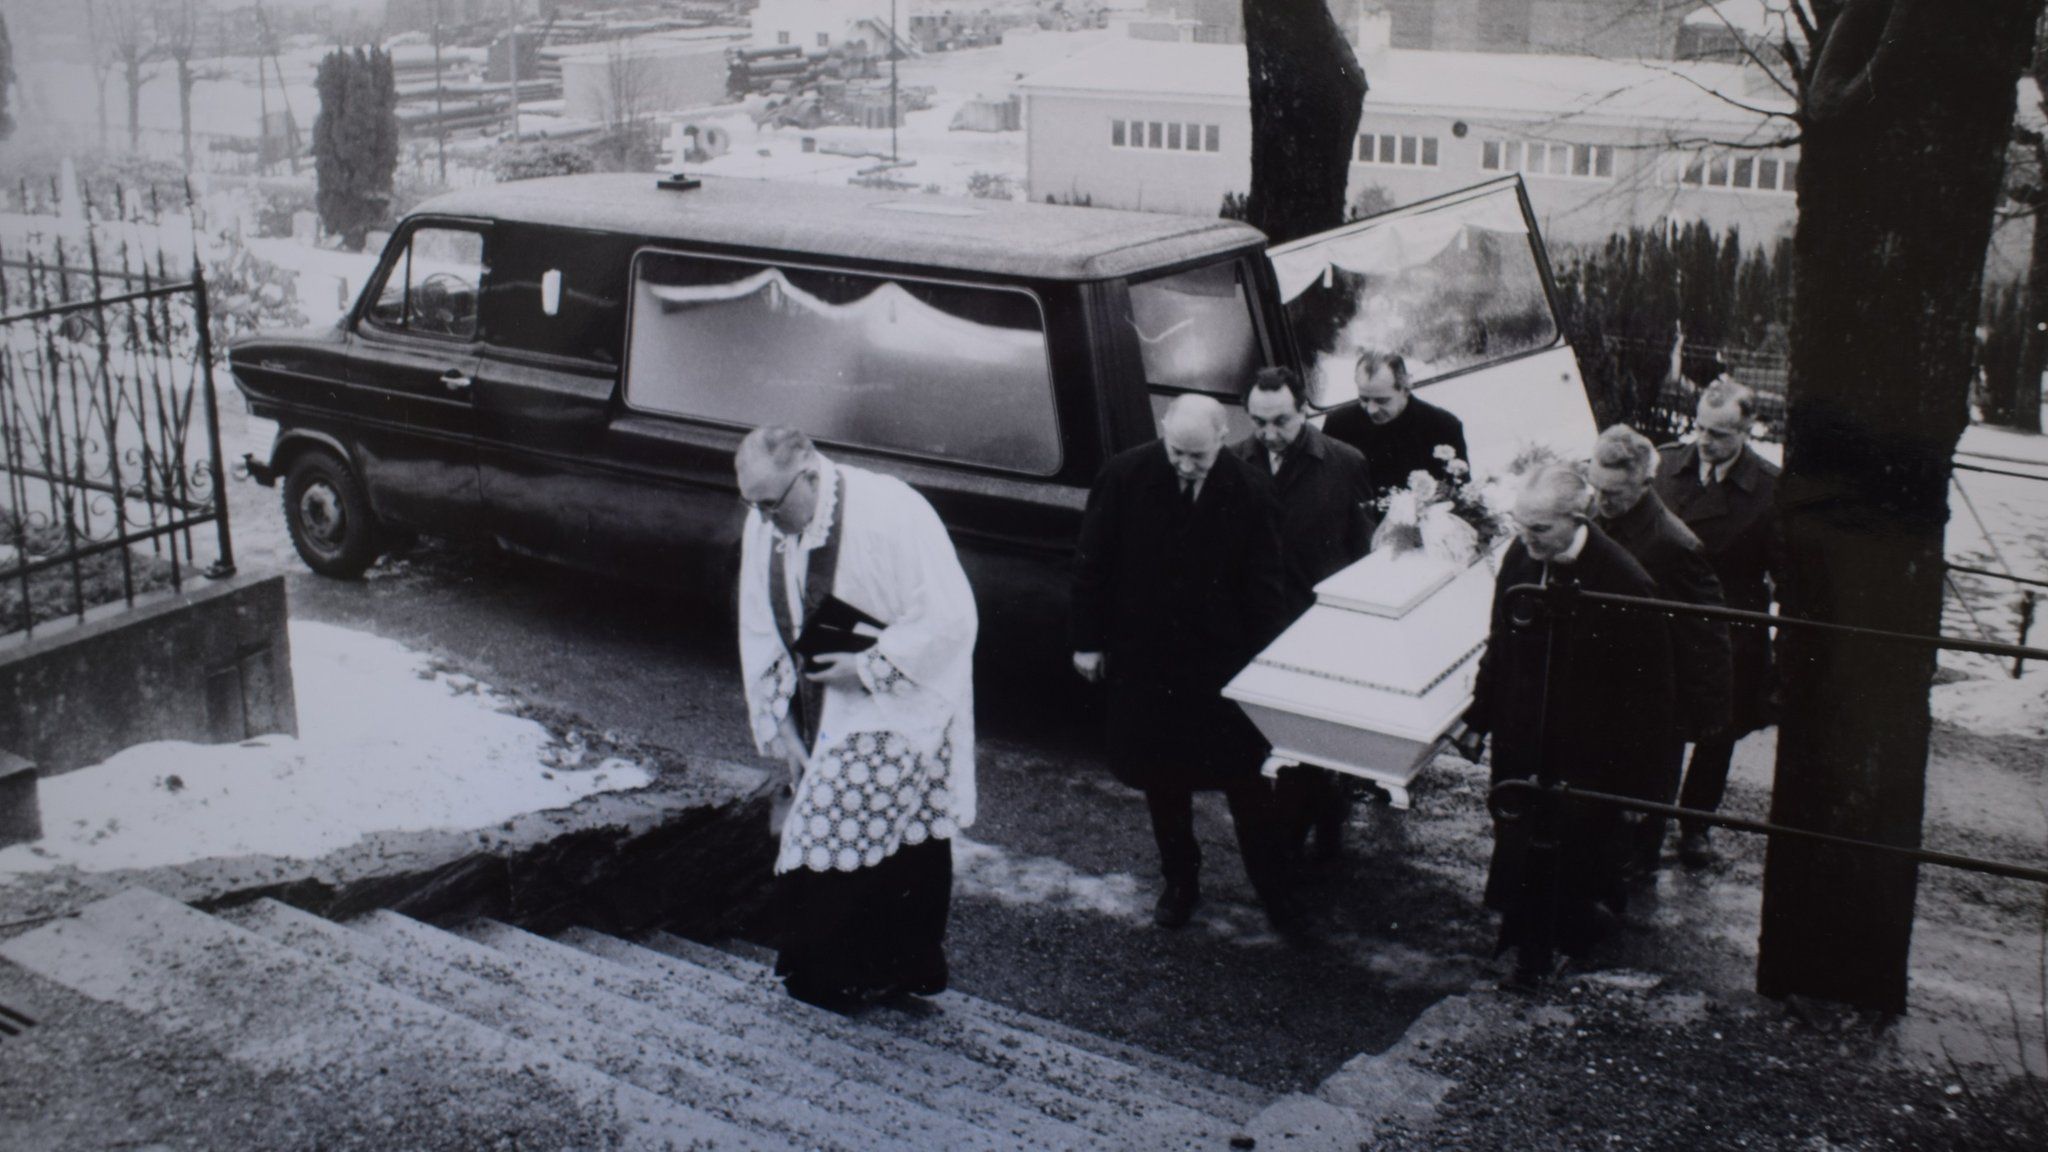 A police photo of the funeral shows a priest at Mollendal cemetery, while six police officers carry a white coffin containing the body of the Isdal Woman